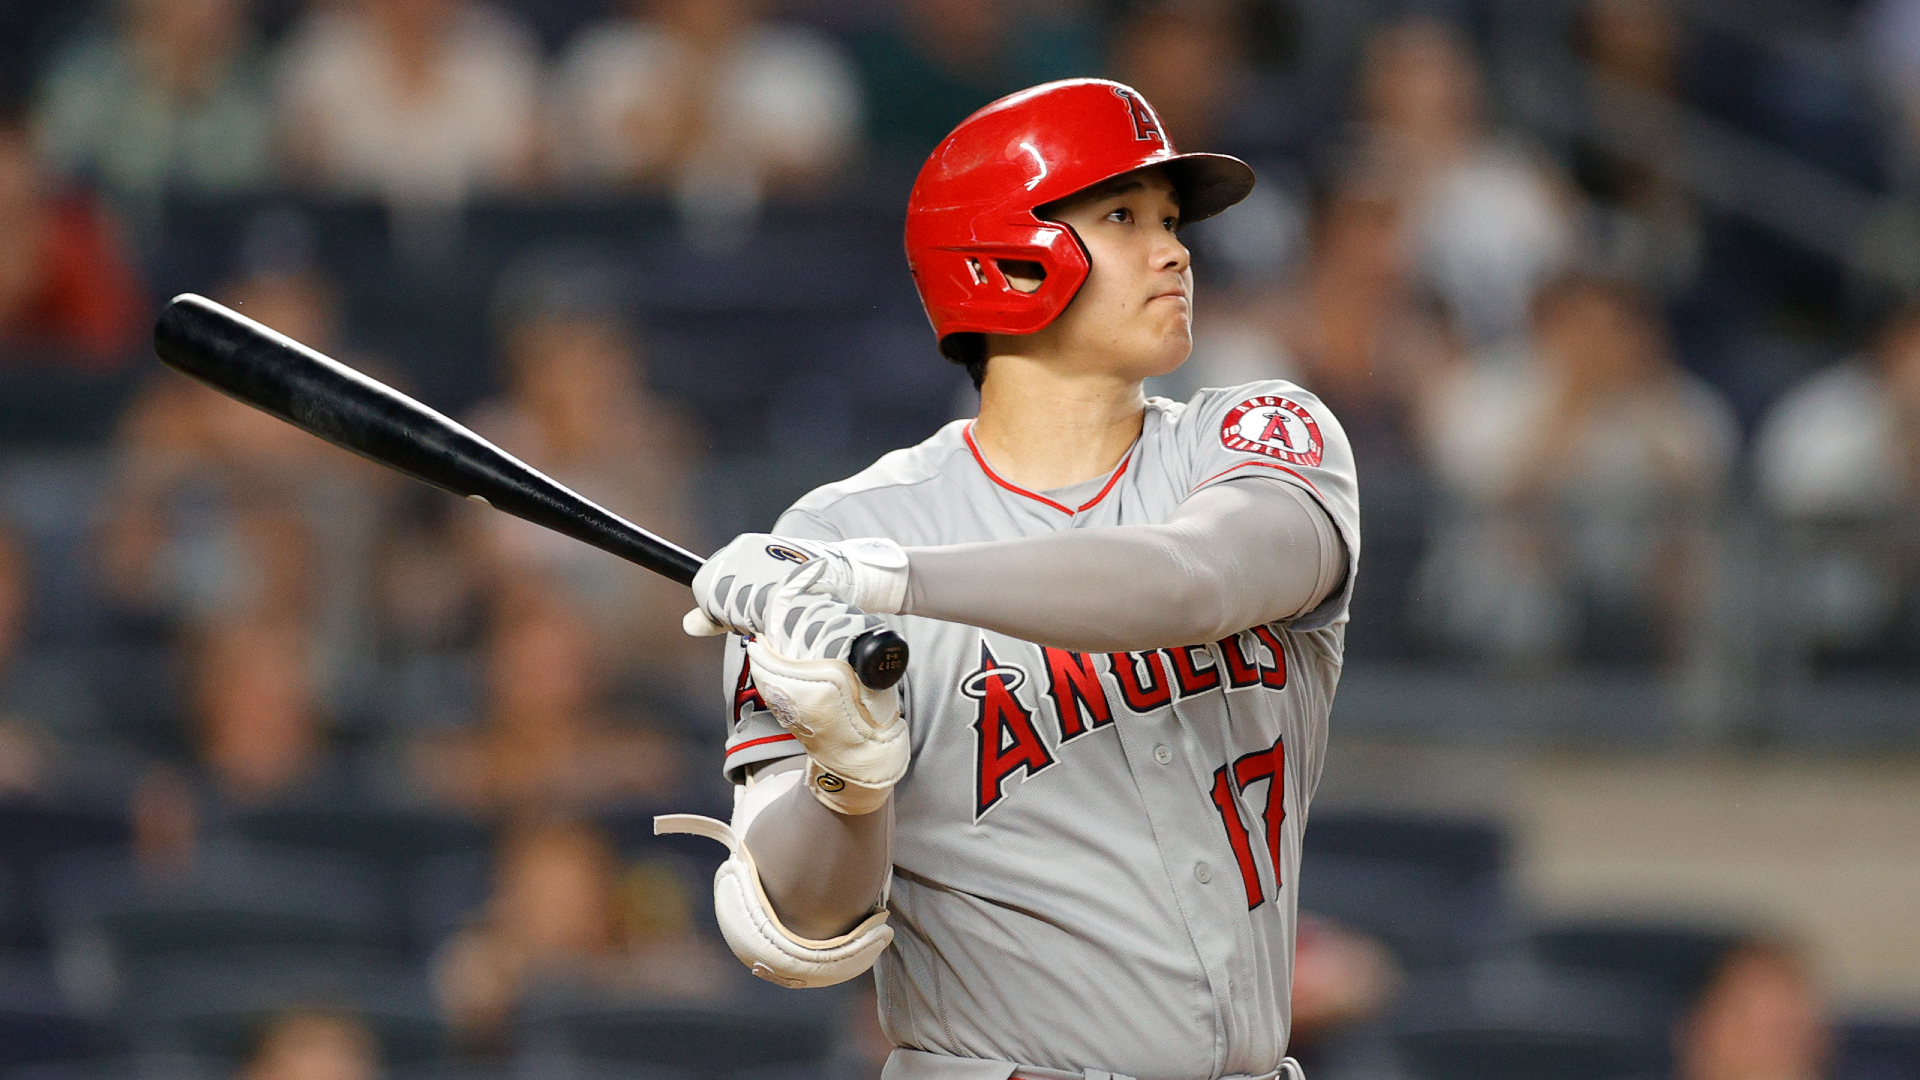 Photo of MLB Twitter Shohei Ohtani of the Awe Angels hit two home runs against the Yankees